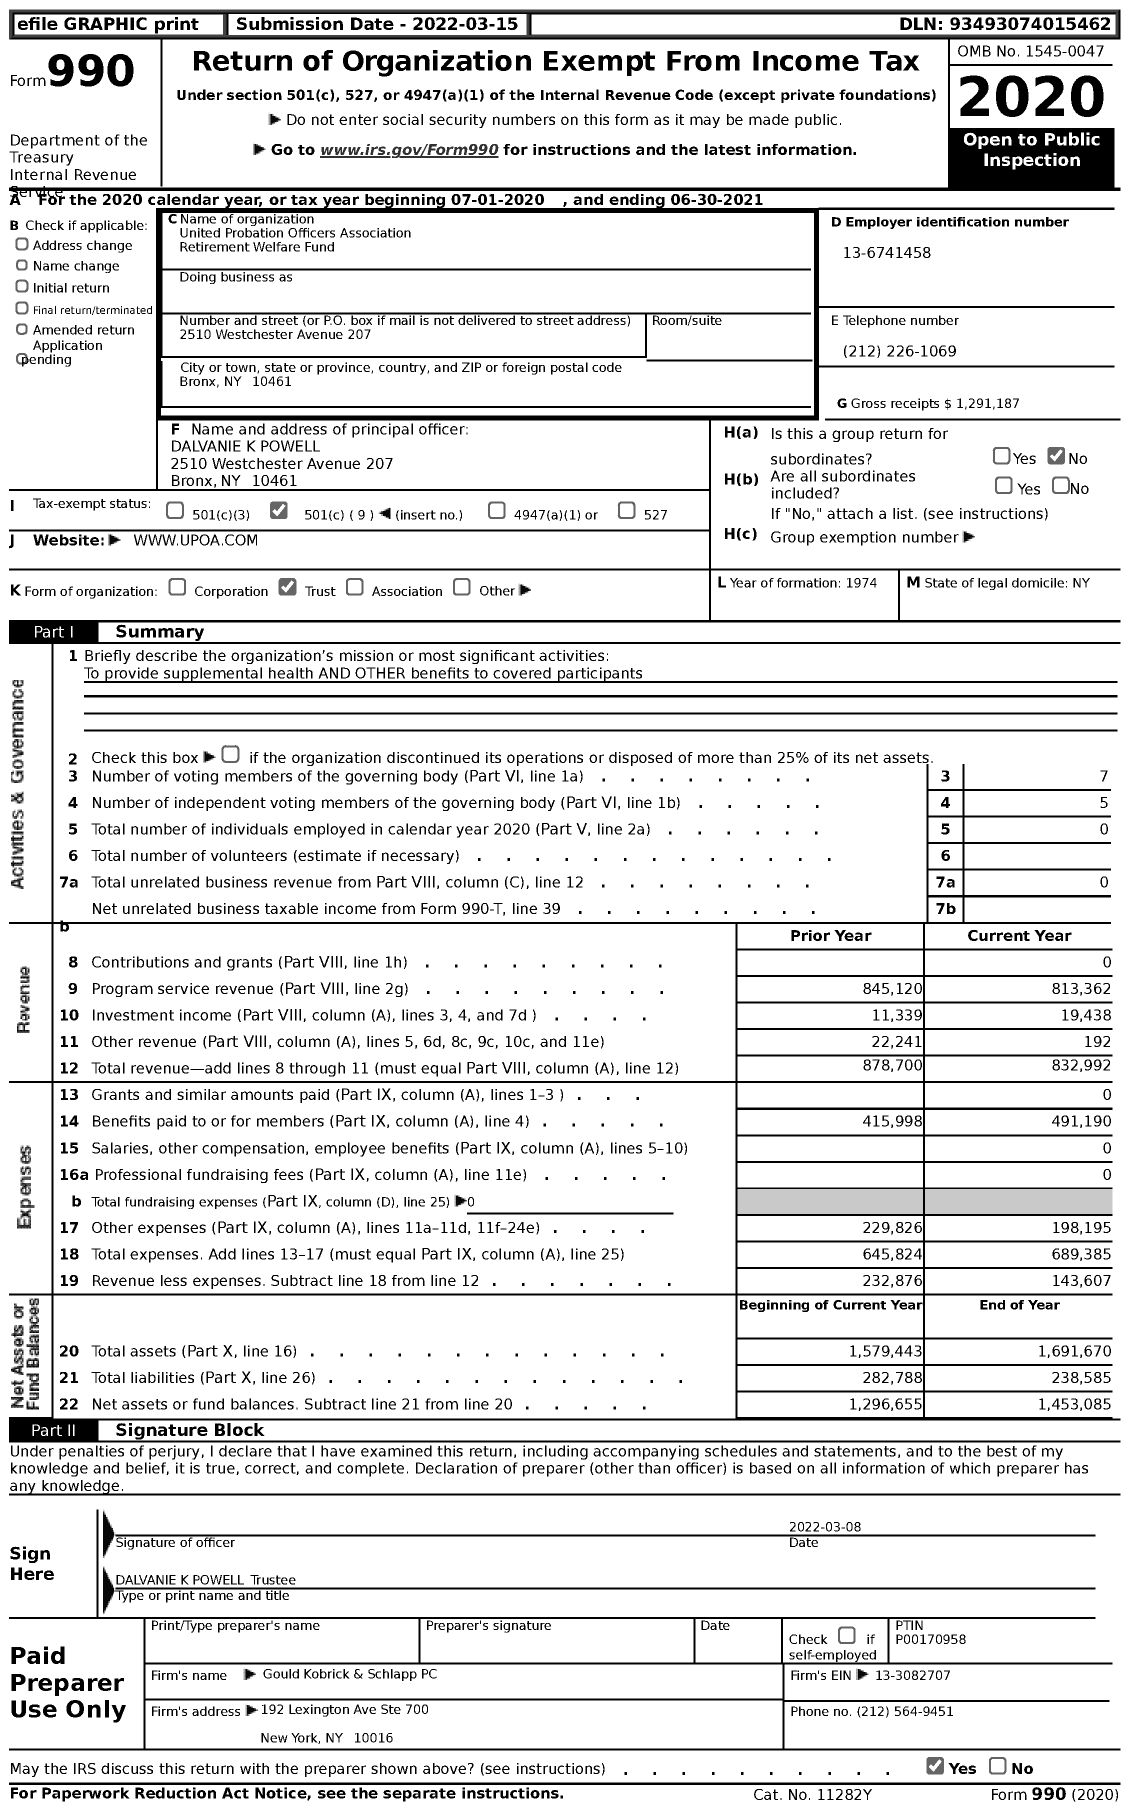 Image of first page of 2020 Form 990 for United Probation Officers Association Retirement Welfare Fund